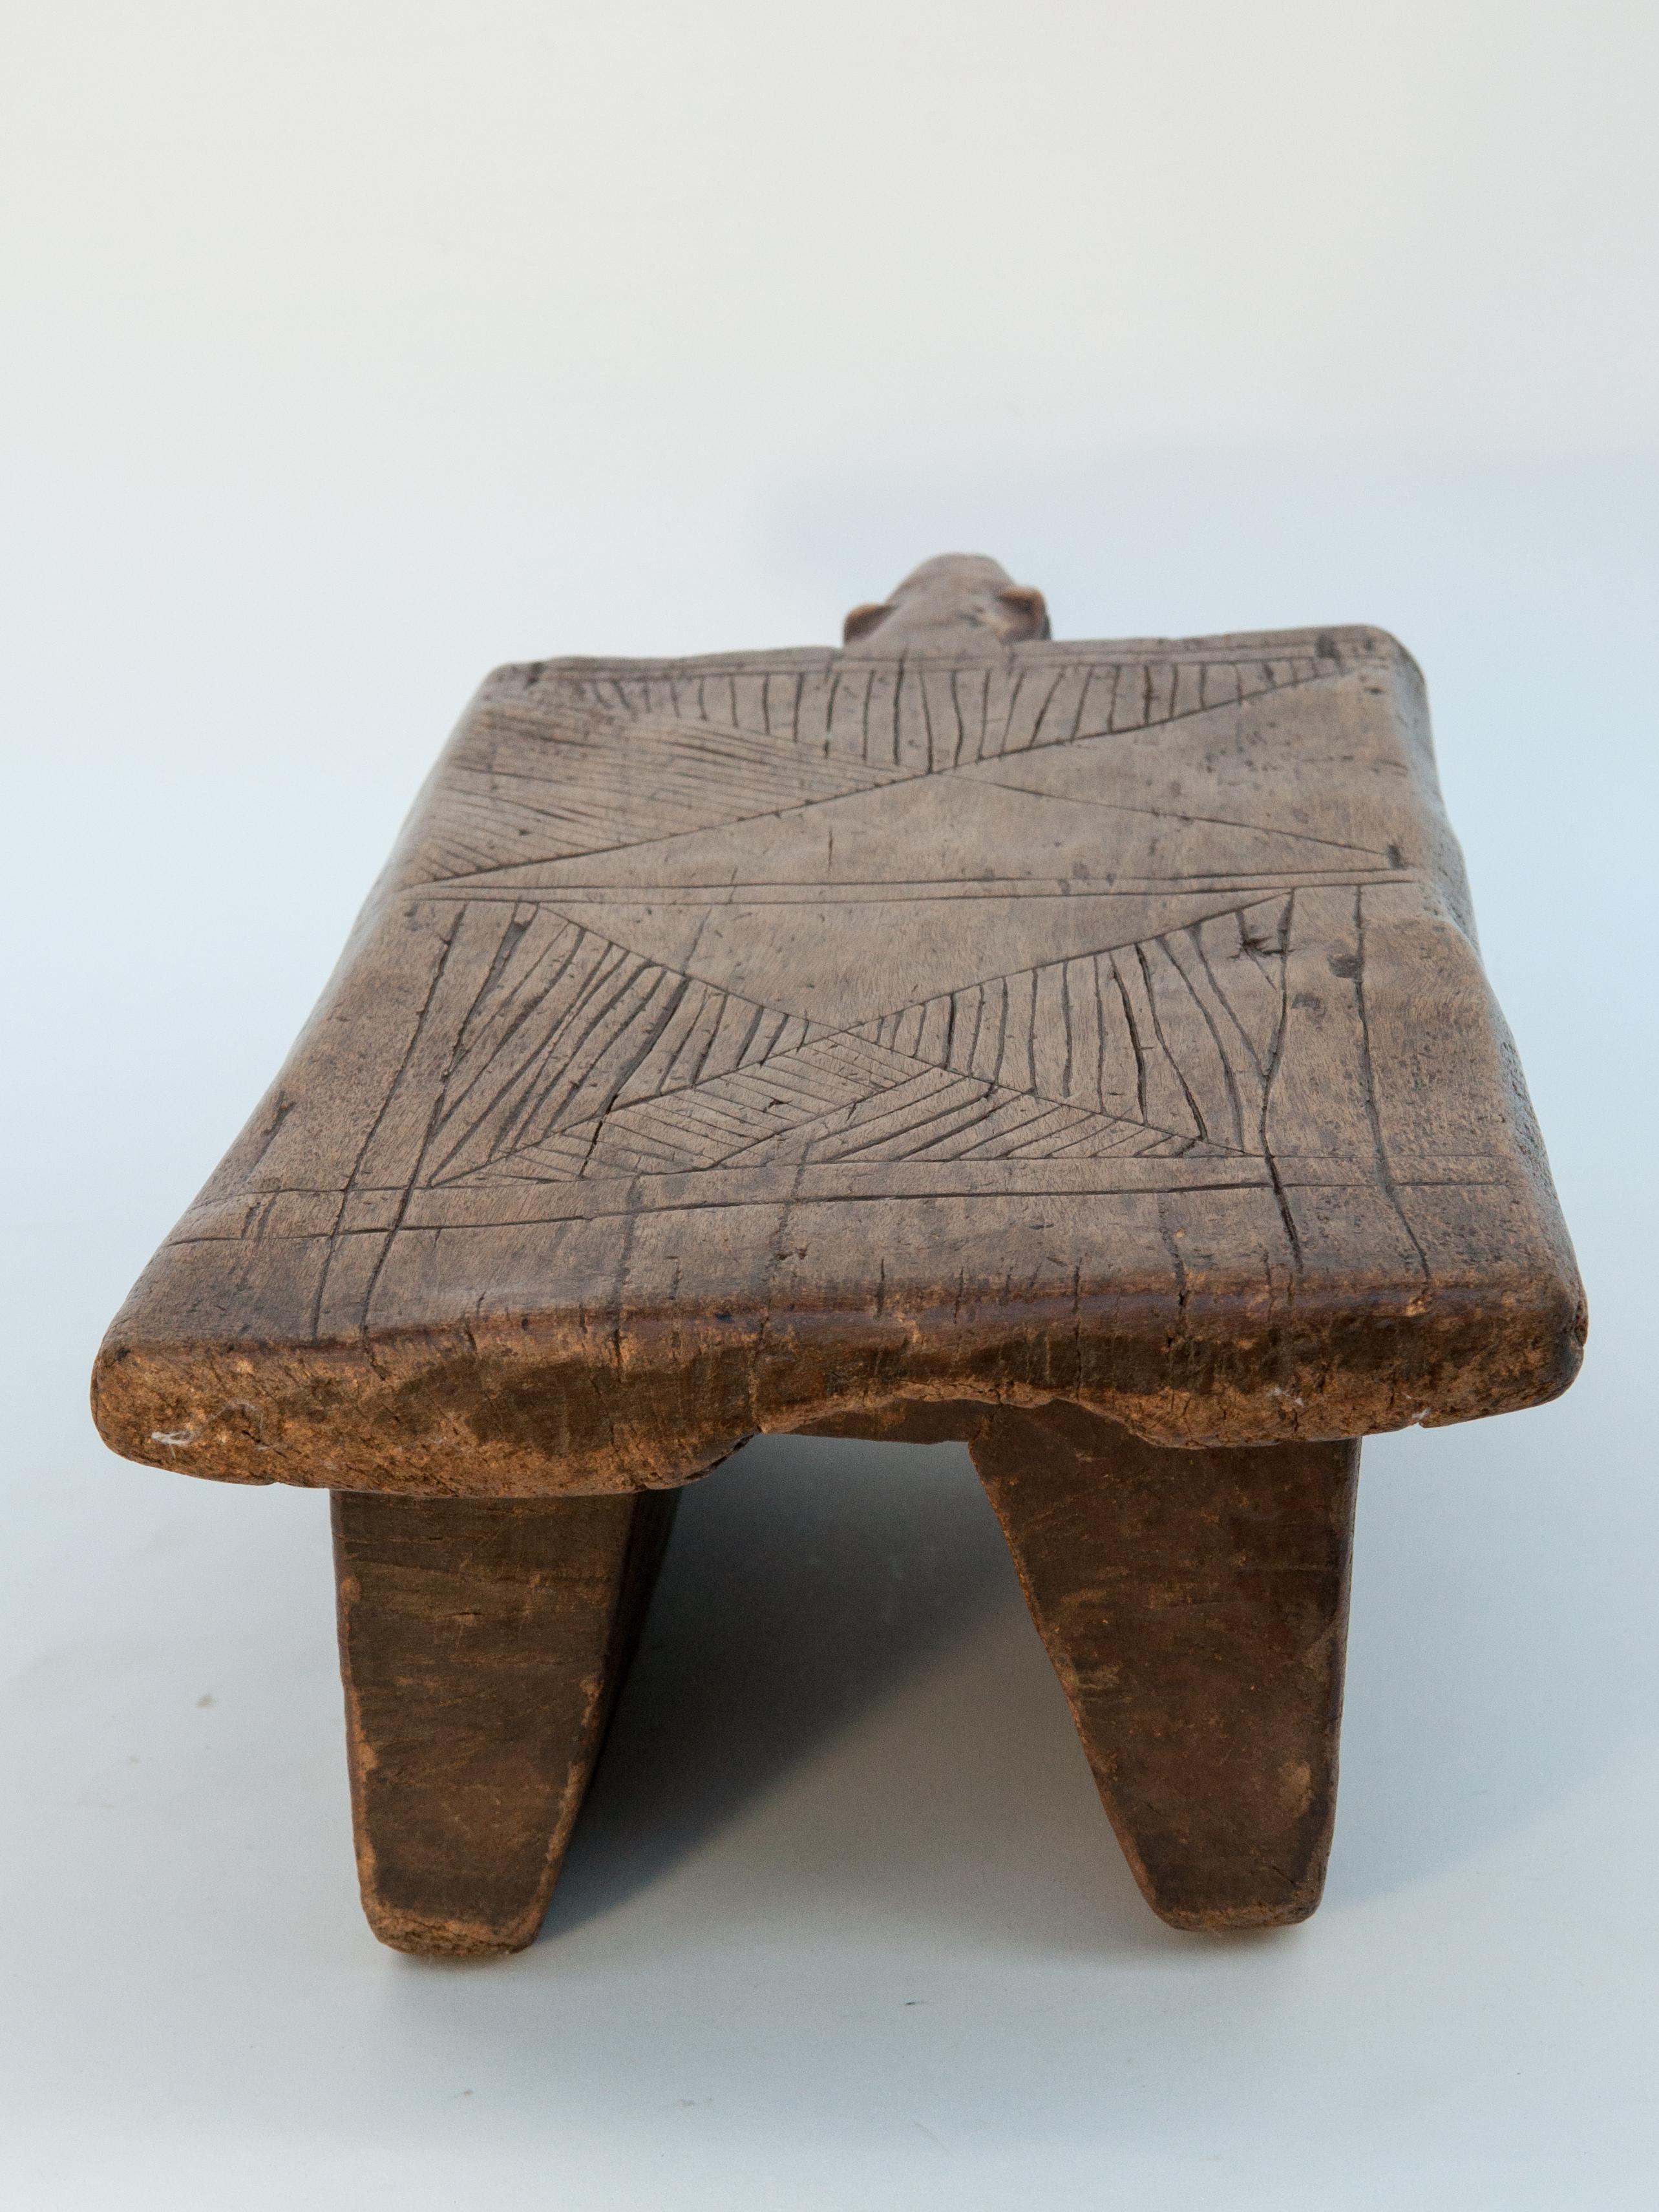 Tribal Wood Stool with Lizard Motif, Niger, Mid-Late 20th Century 5